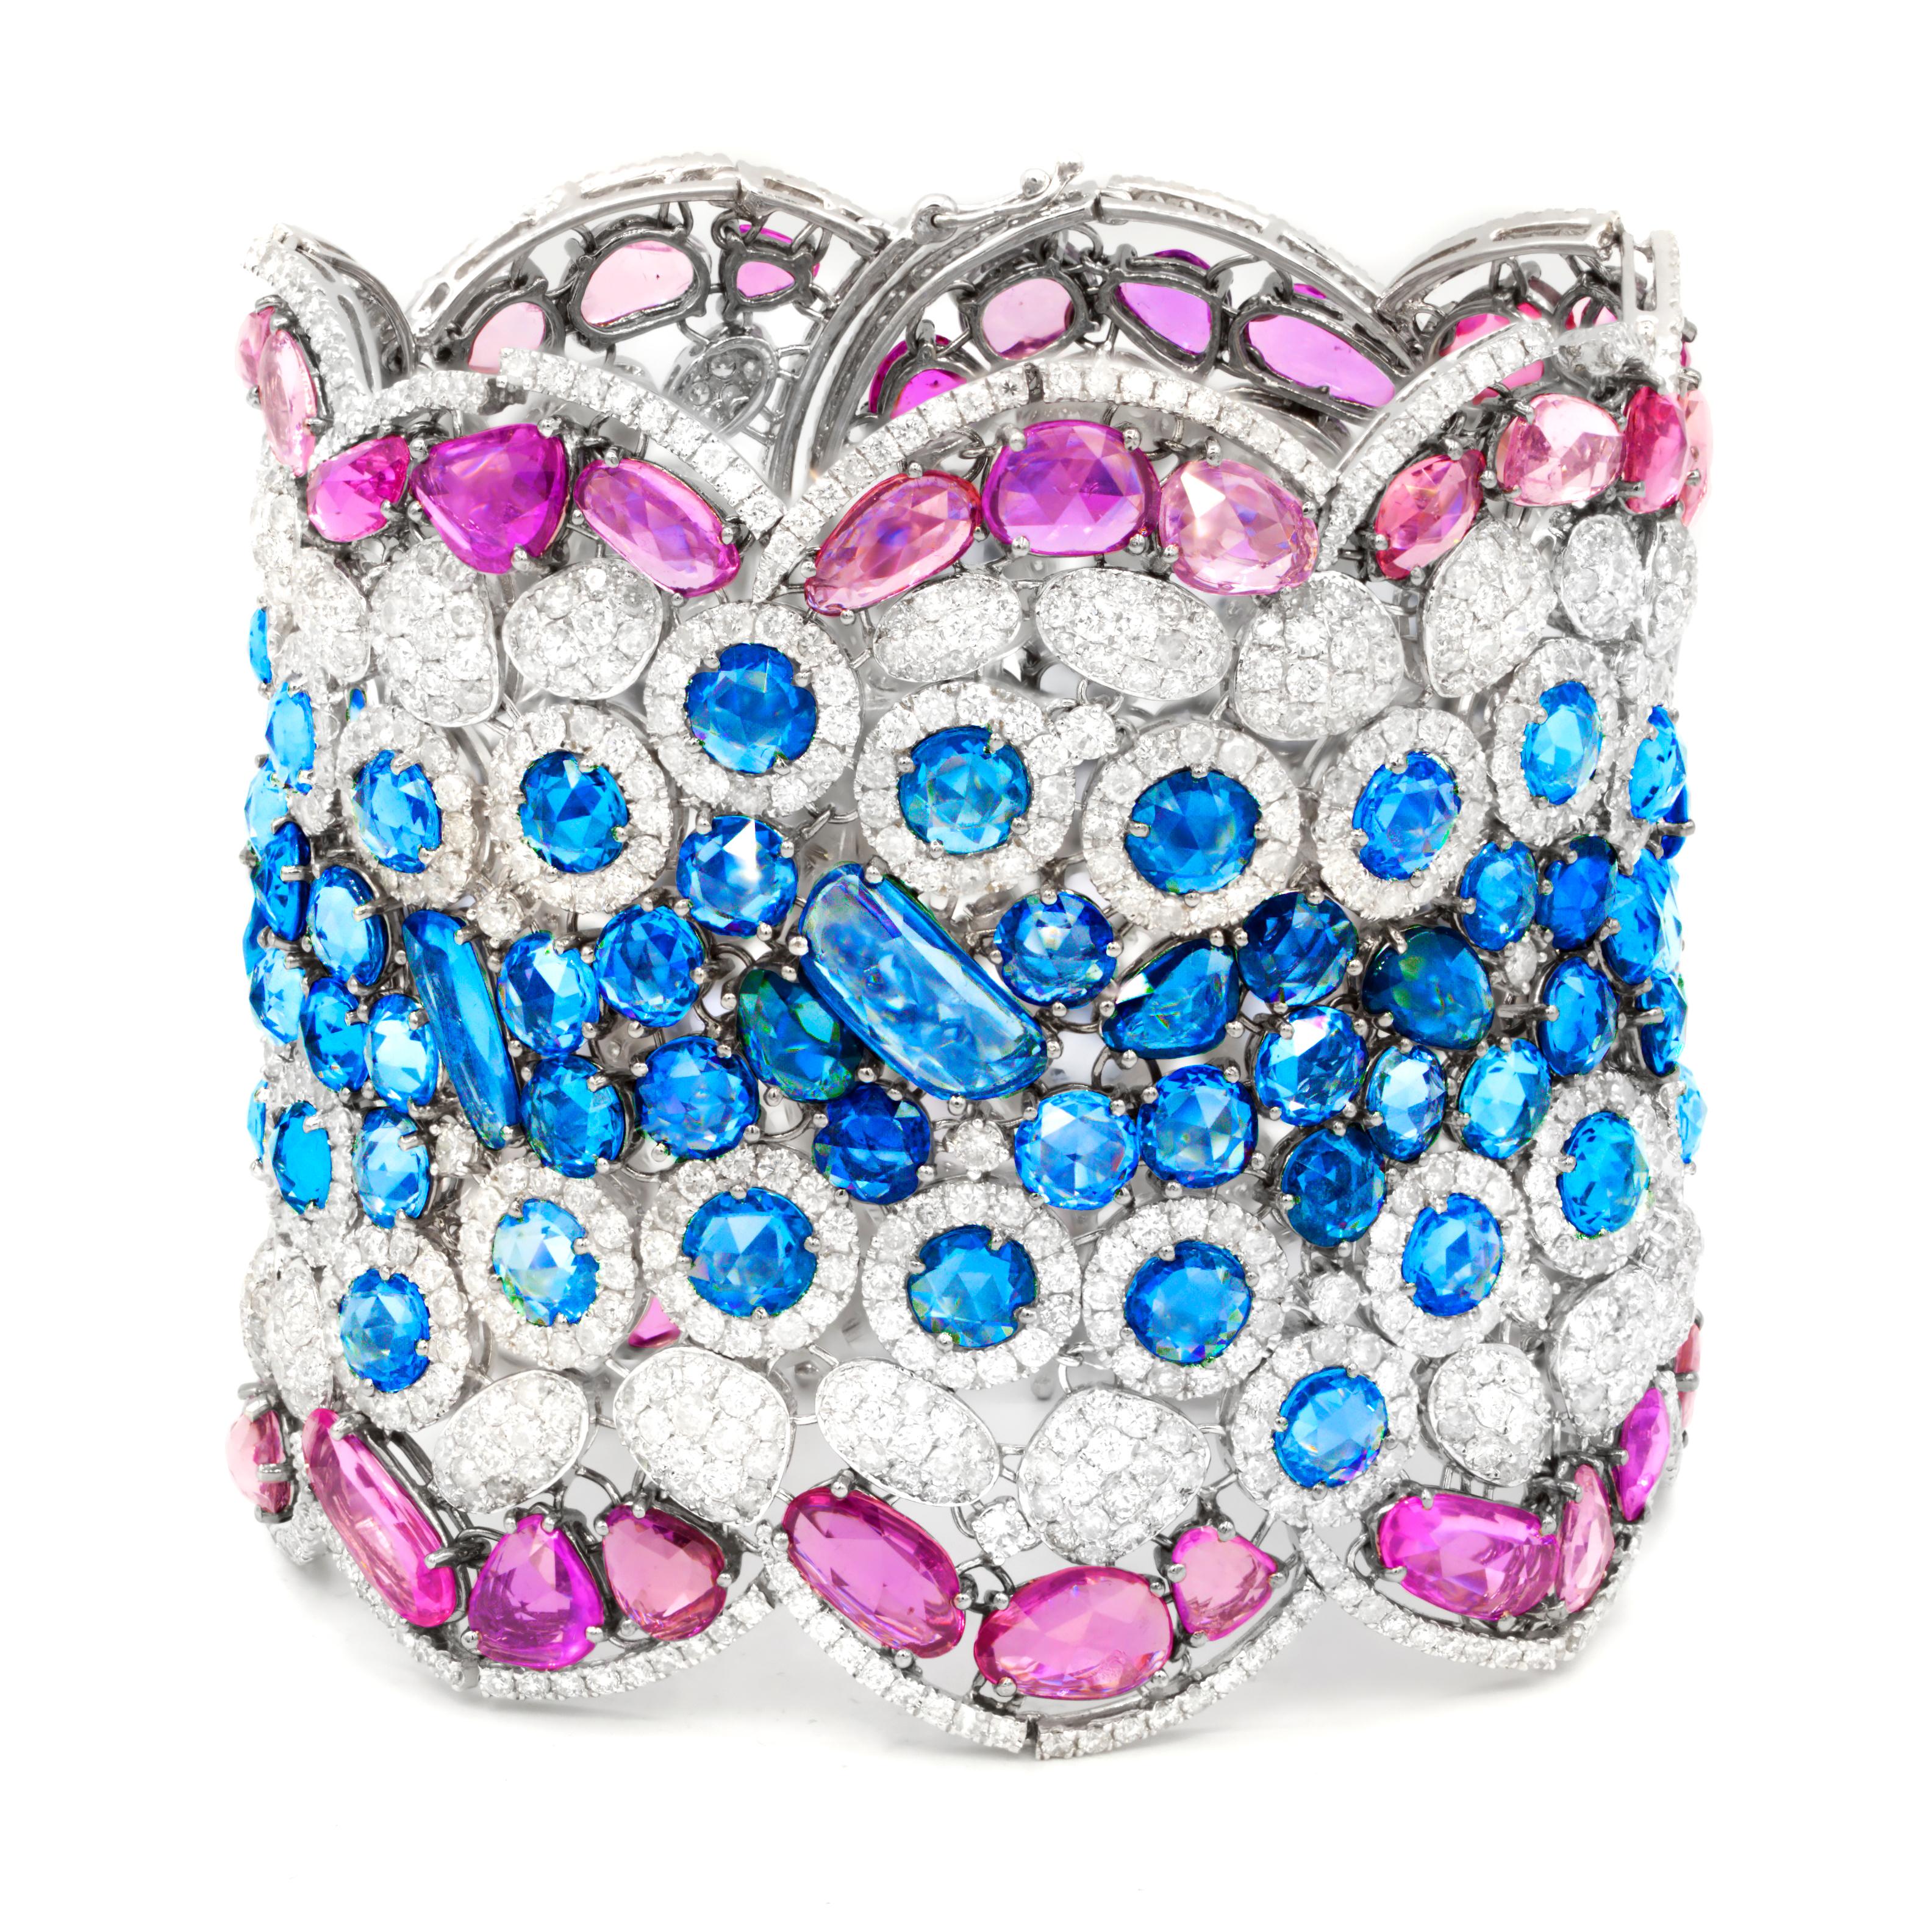 Modern Diana M. 18kt white gold bracelet featuring 102.85 cts of pink and blue rose cut For Sale